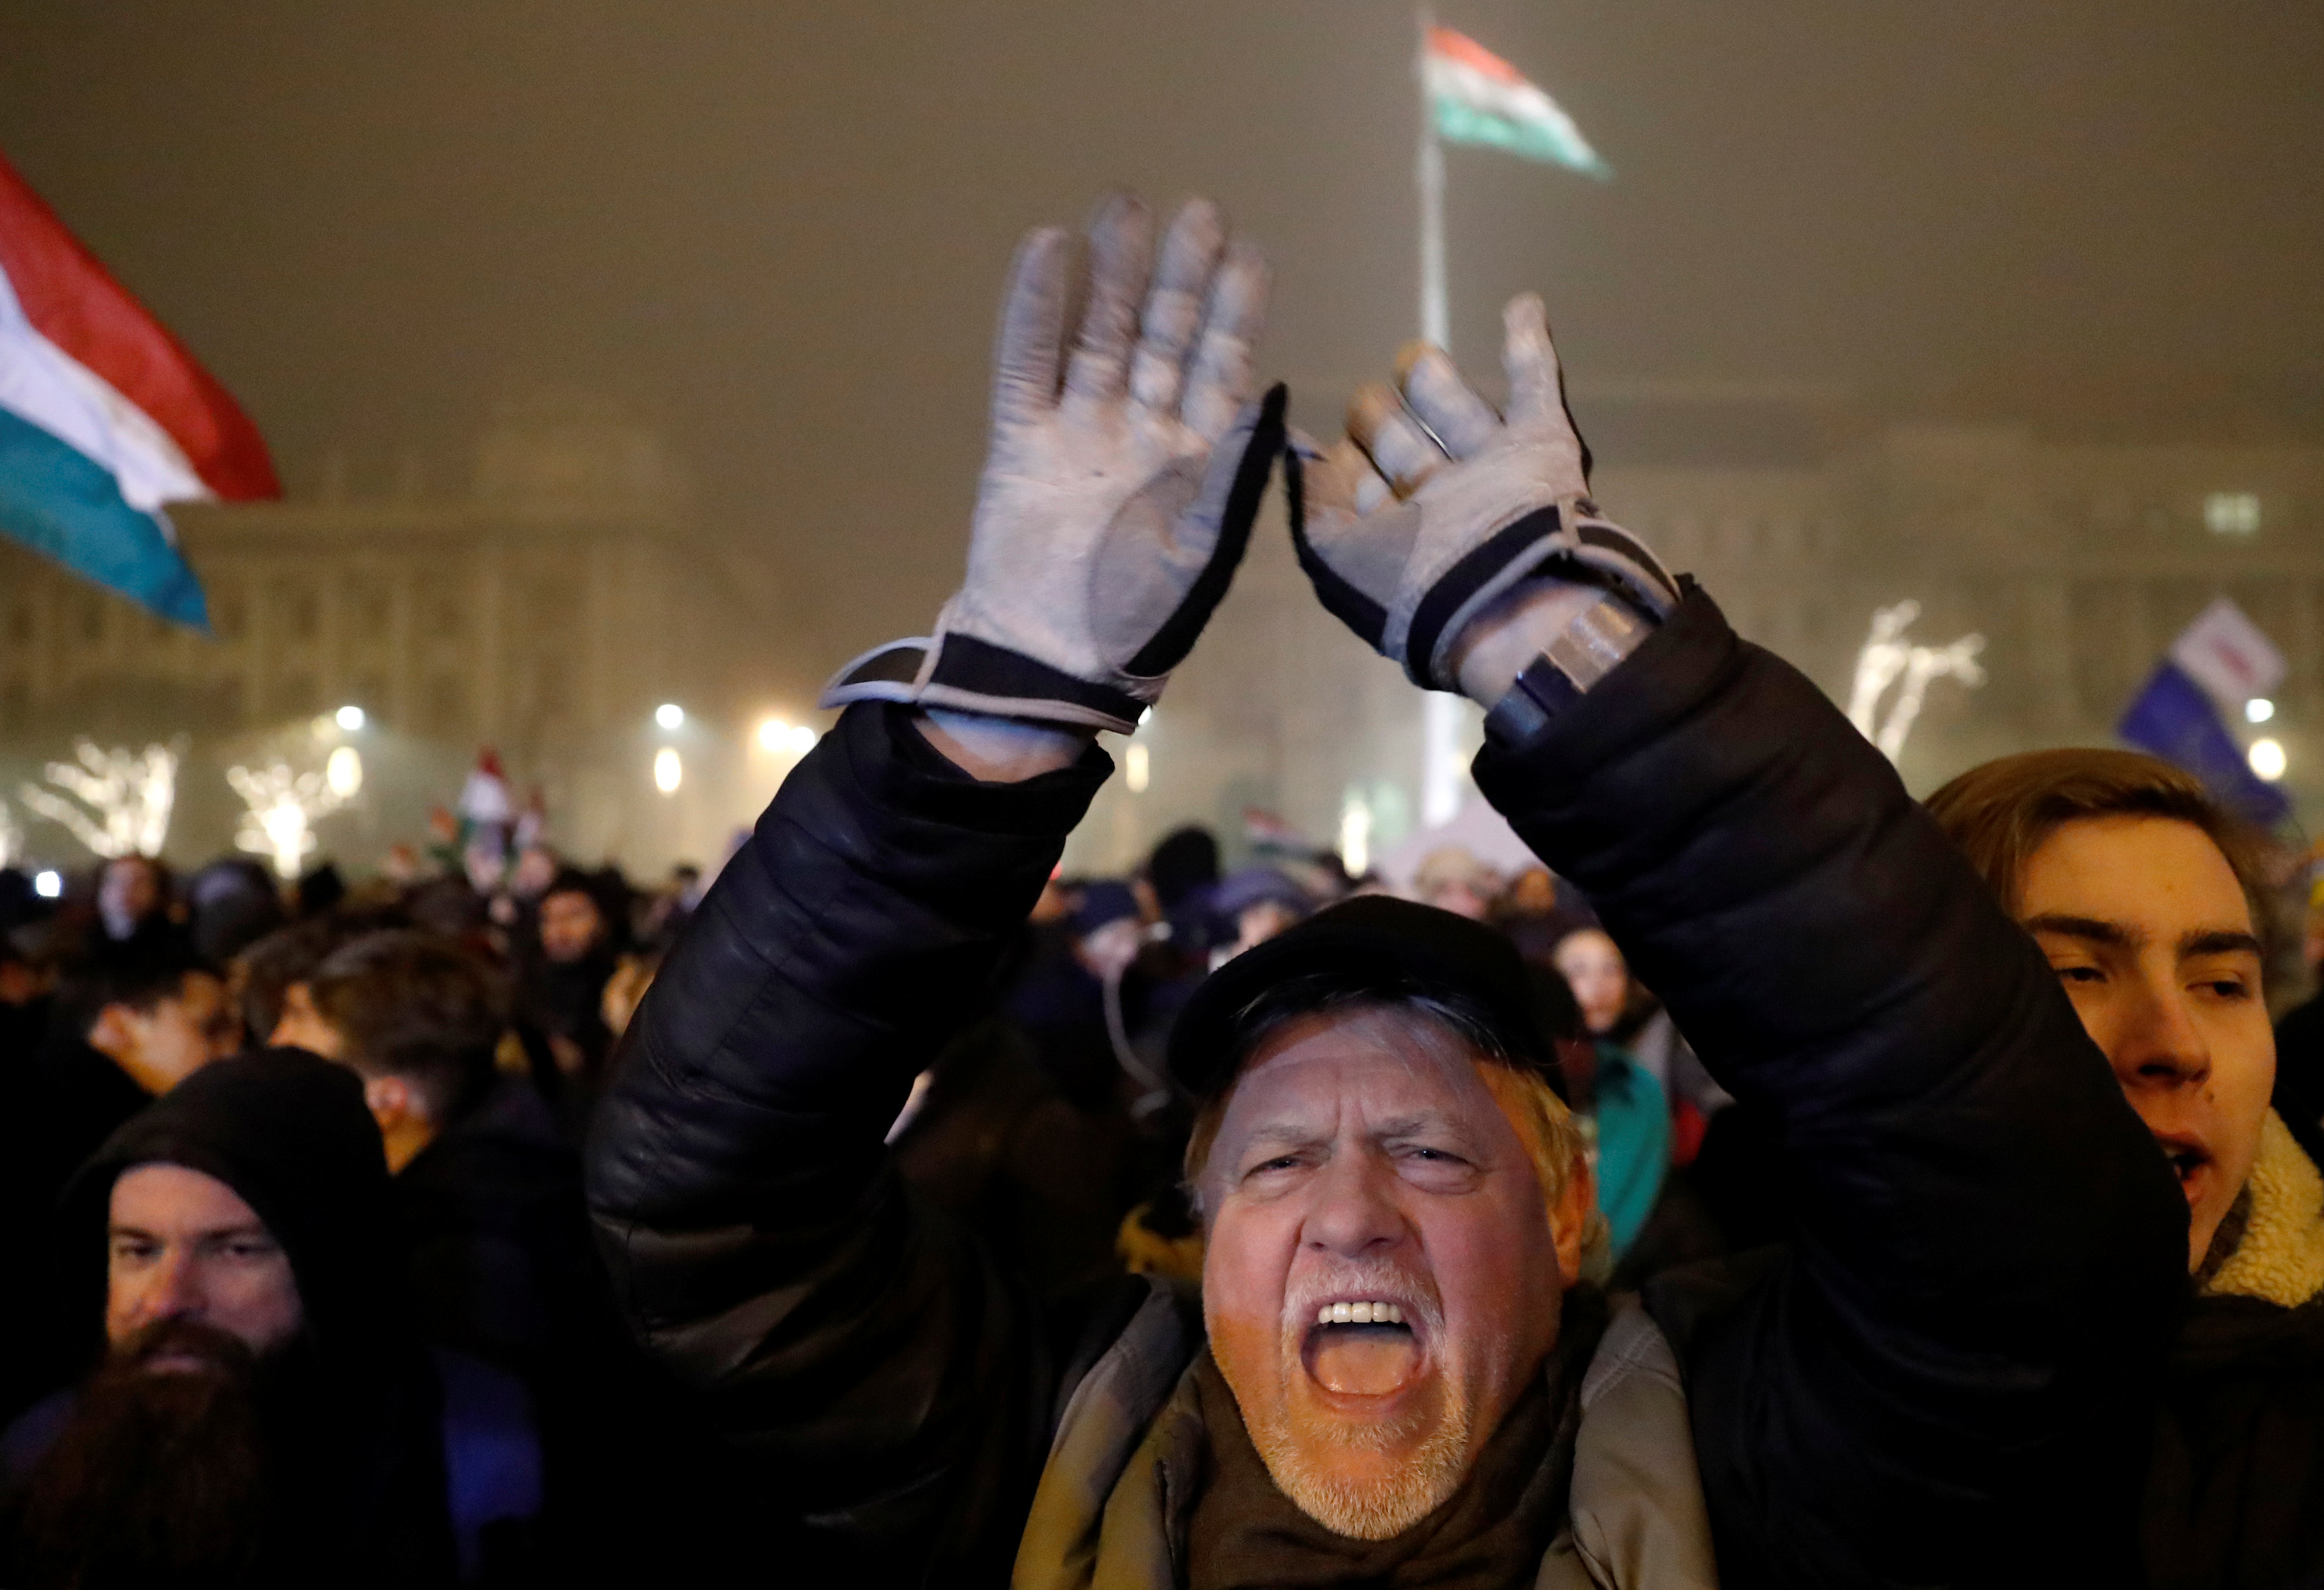 2018-12-13T195109Z_1405025140_RC1C8A37D080_RTRMADP_3_HUNGARY-PROTESTS